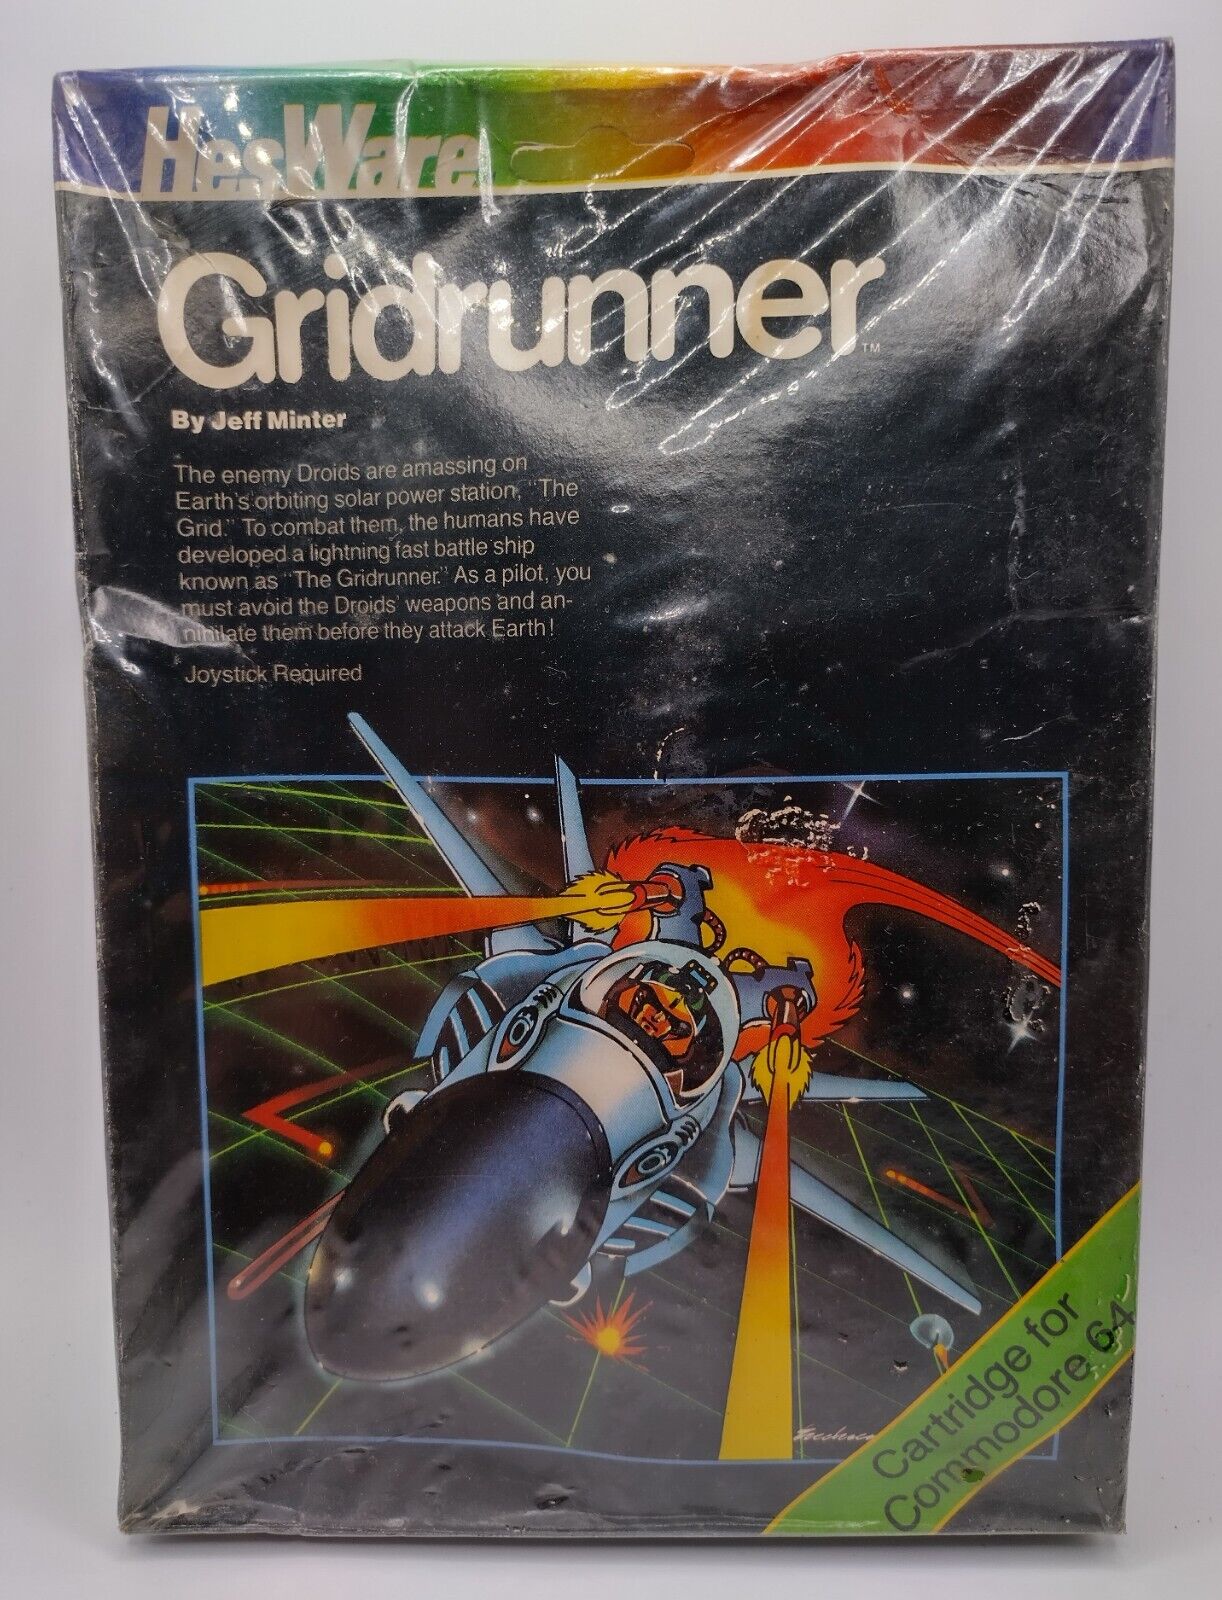 Gridrunner HES WARE Cartridge for Commodore 64 Brand New Sealed